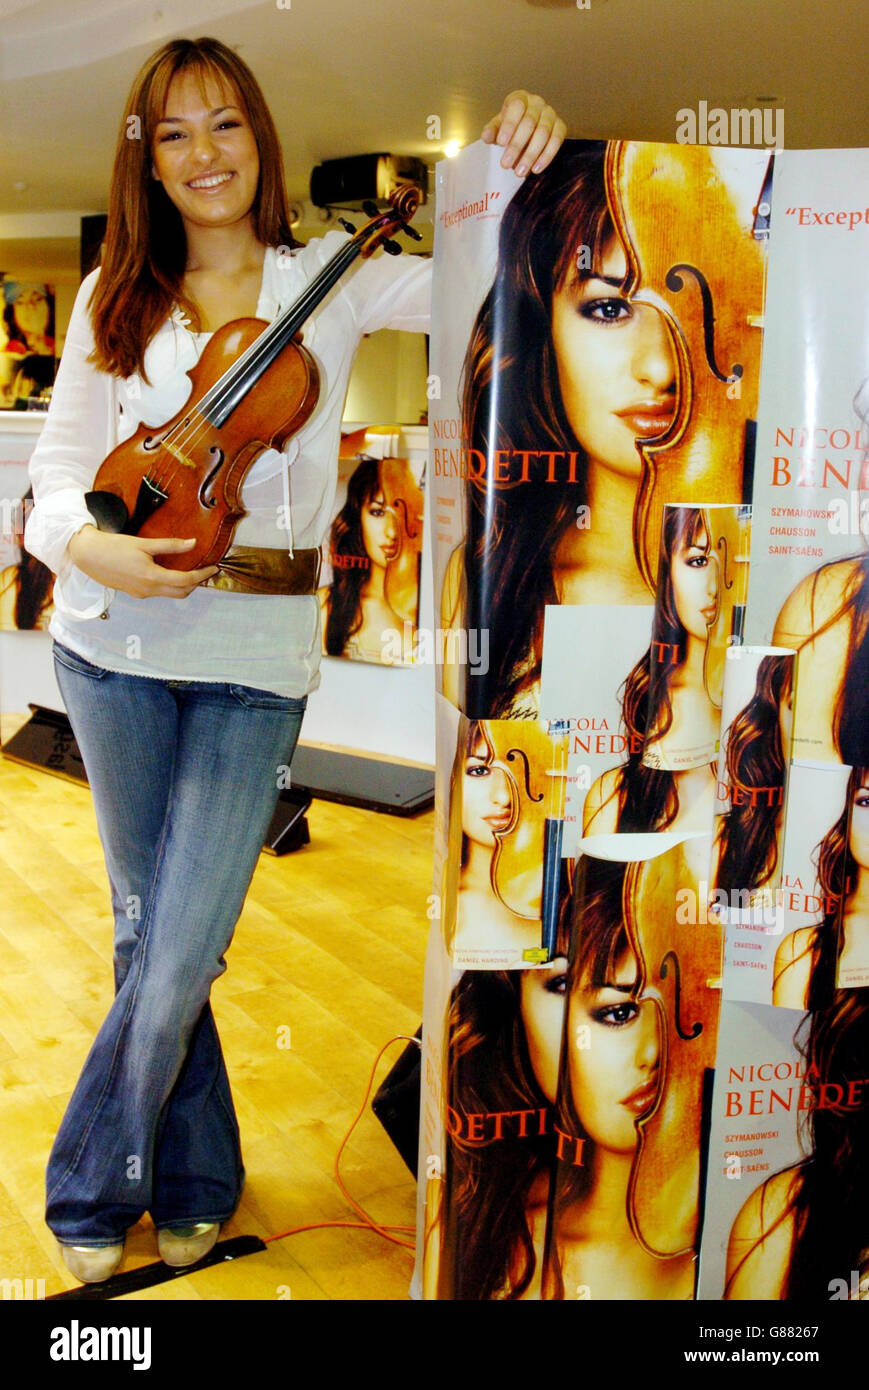 Scottish violinist and BBC Young Musician of the Year Nicola Benedetti, 17. Stock Photo